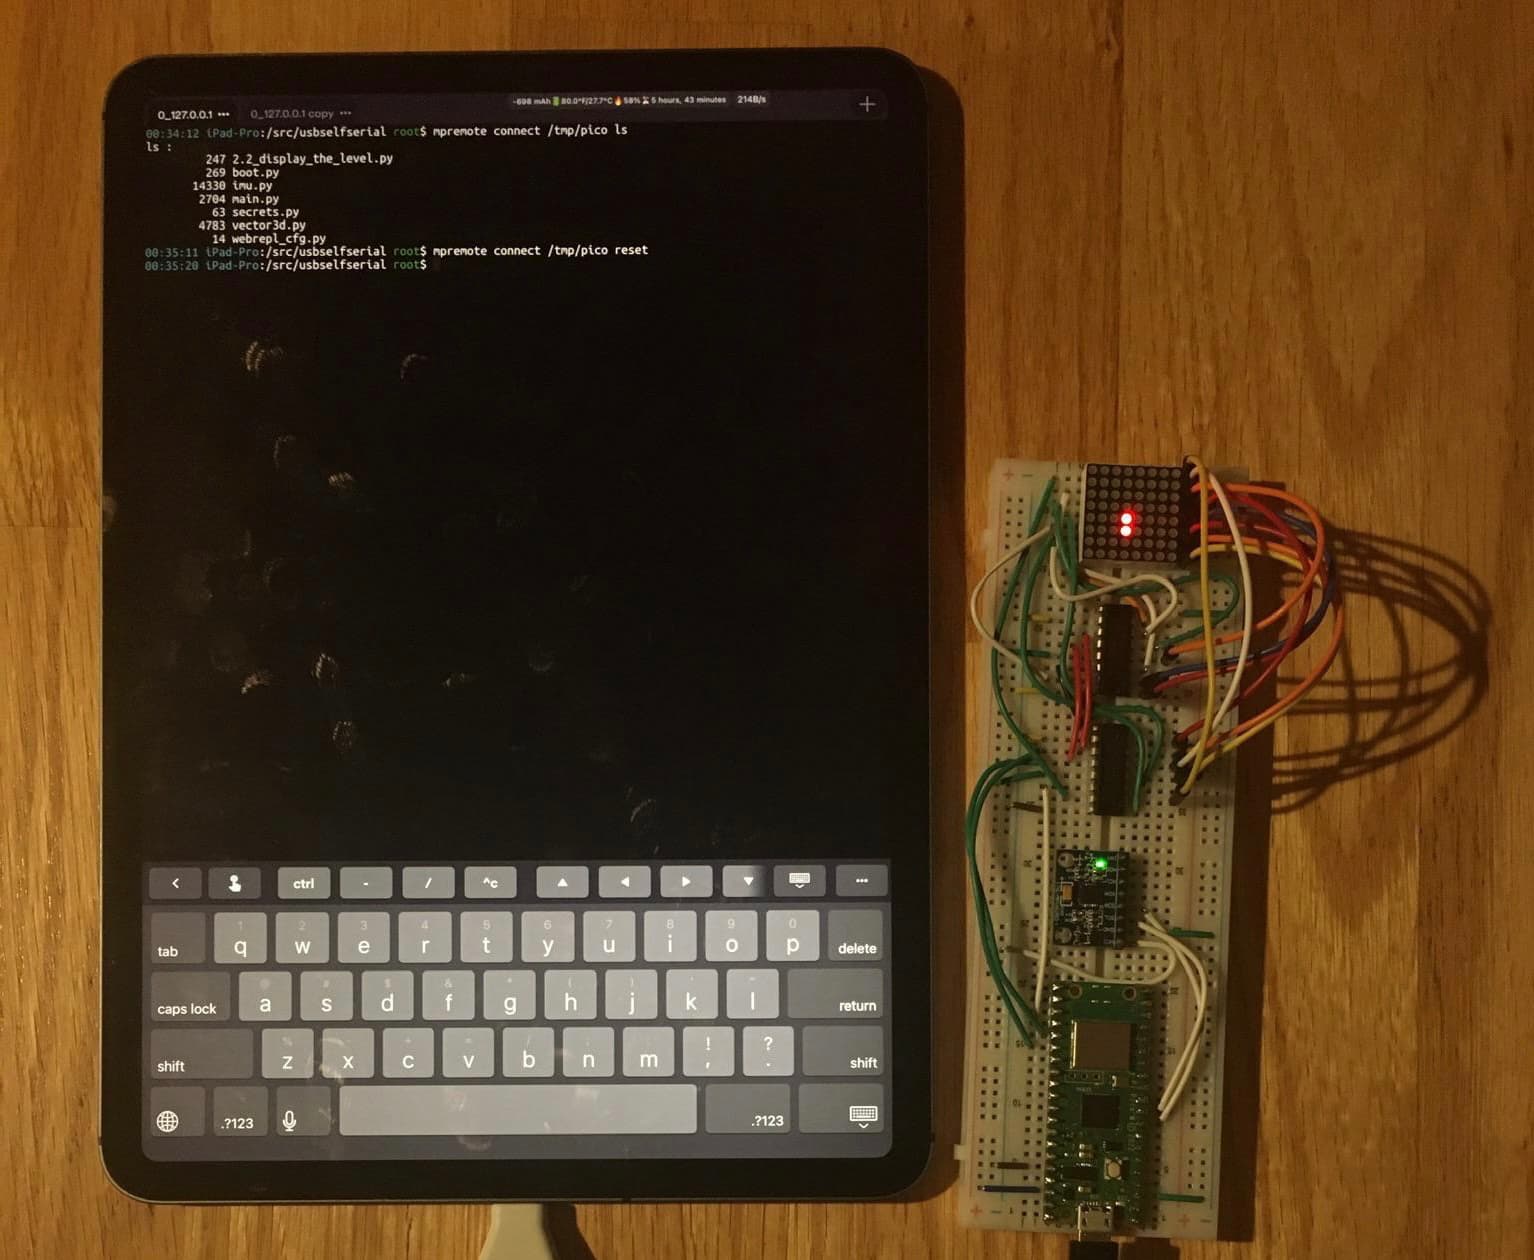 Hobbyist uses jailbroken iPad Pro and software hacks to make device communicate with USB serial devices